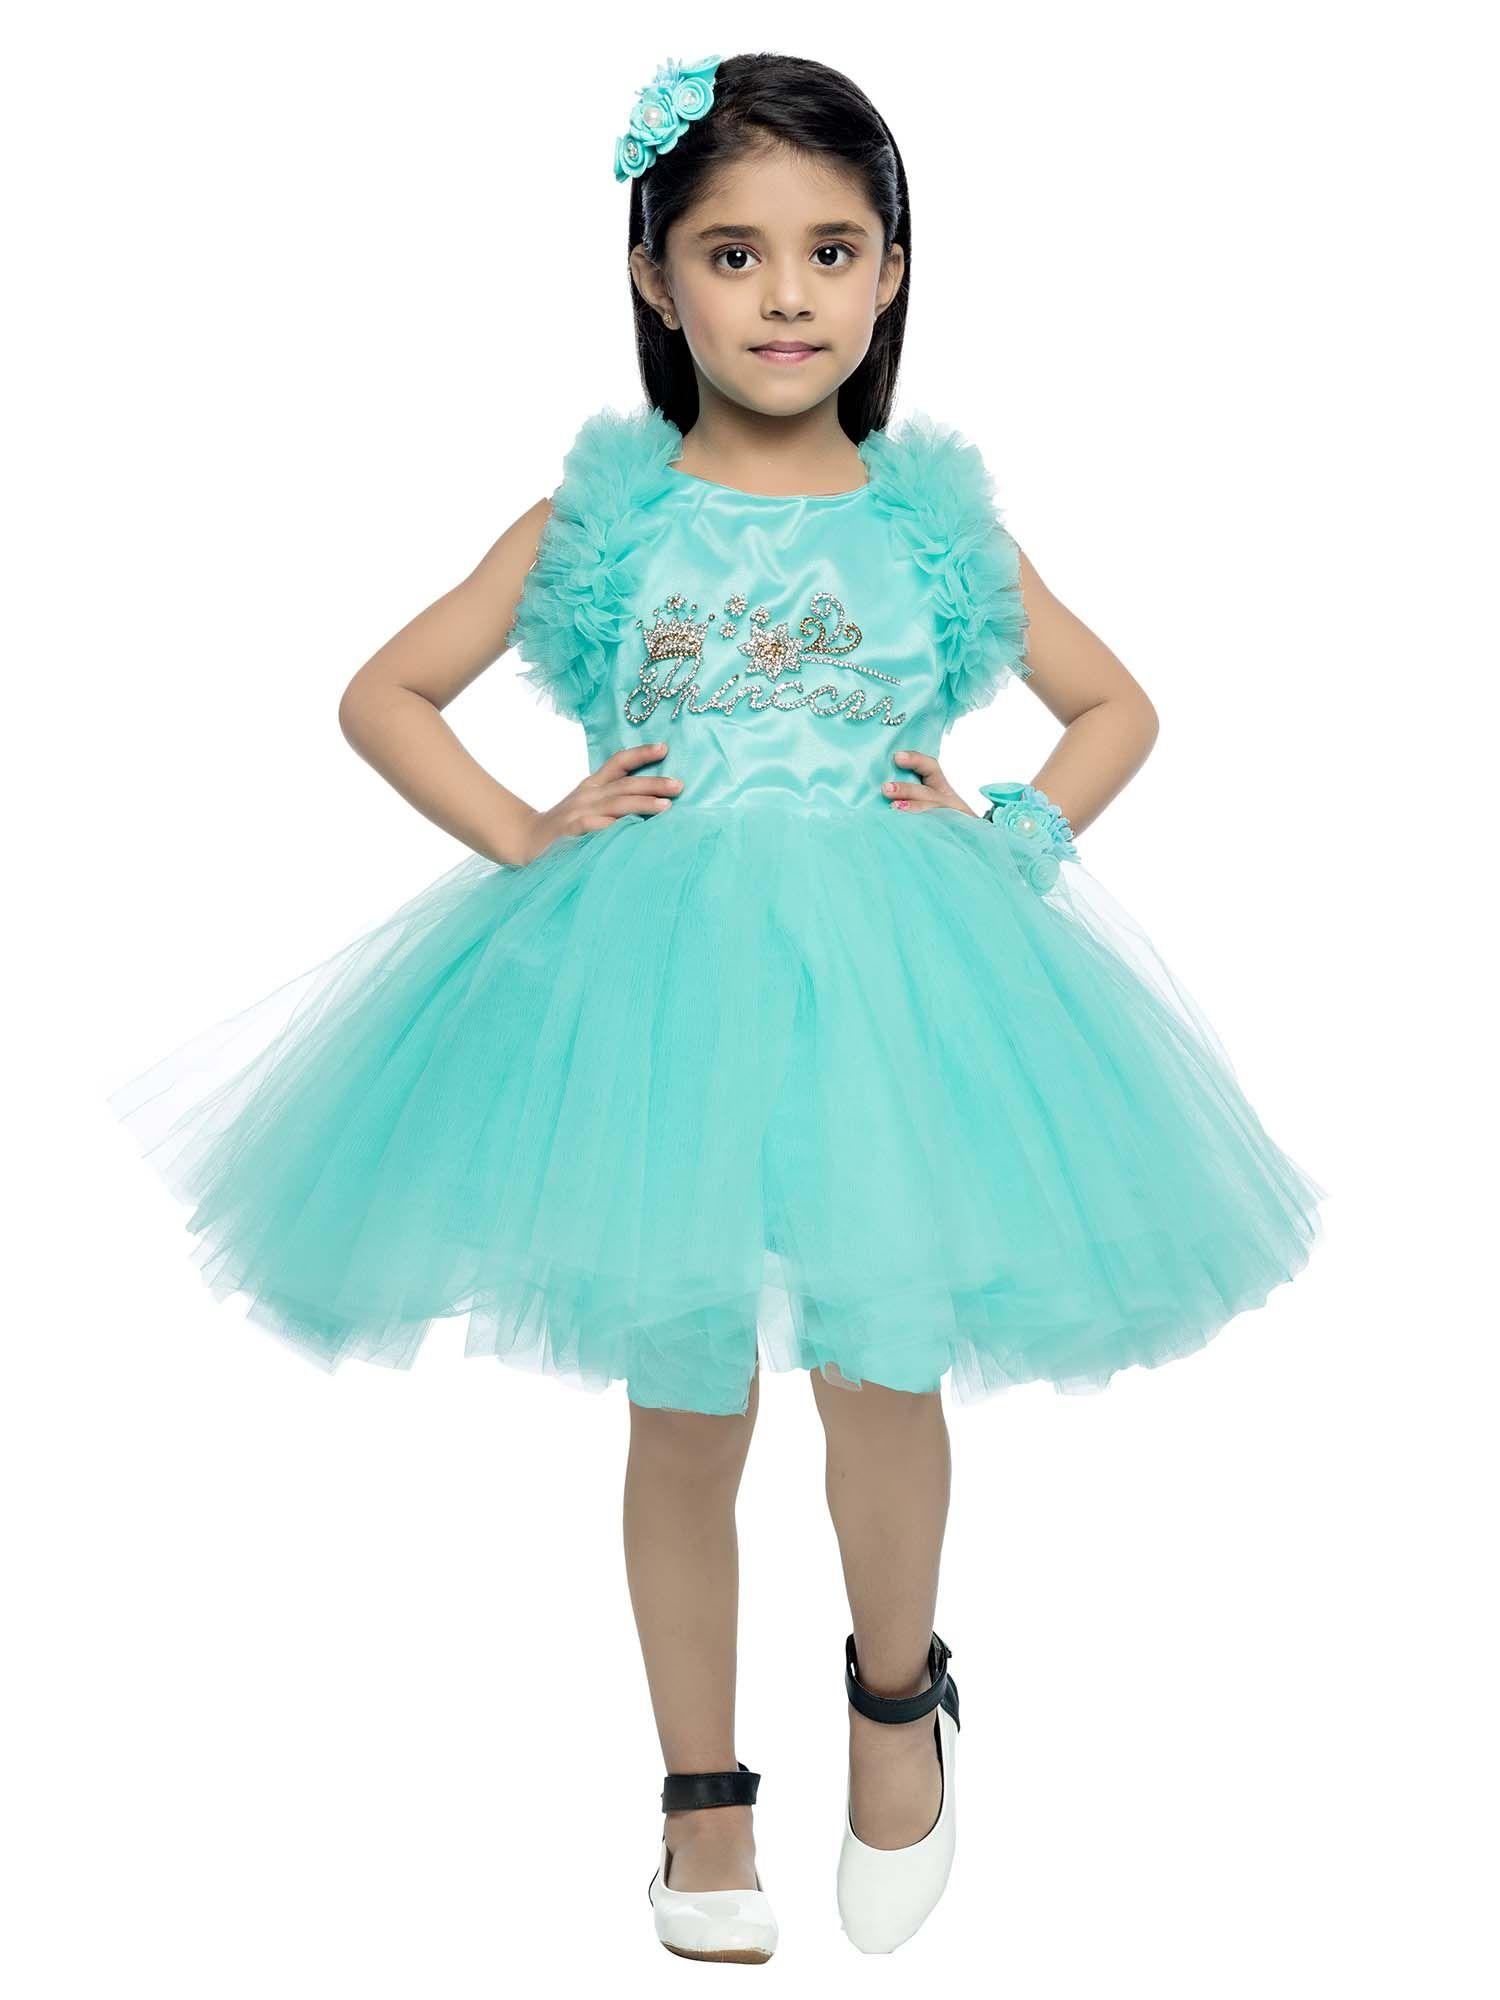 princess party dress turquoise